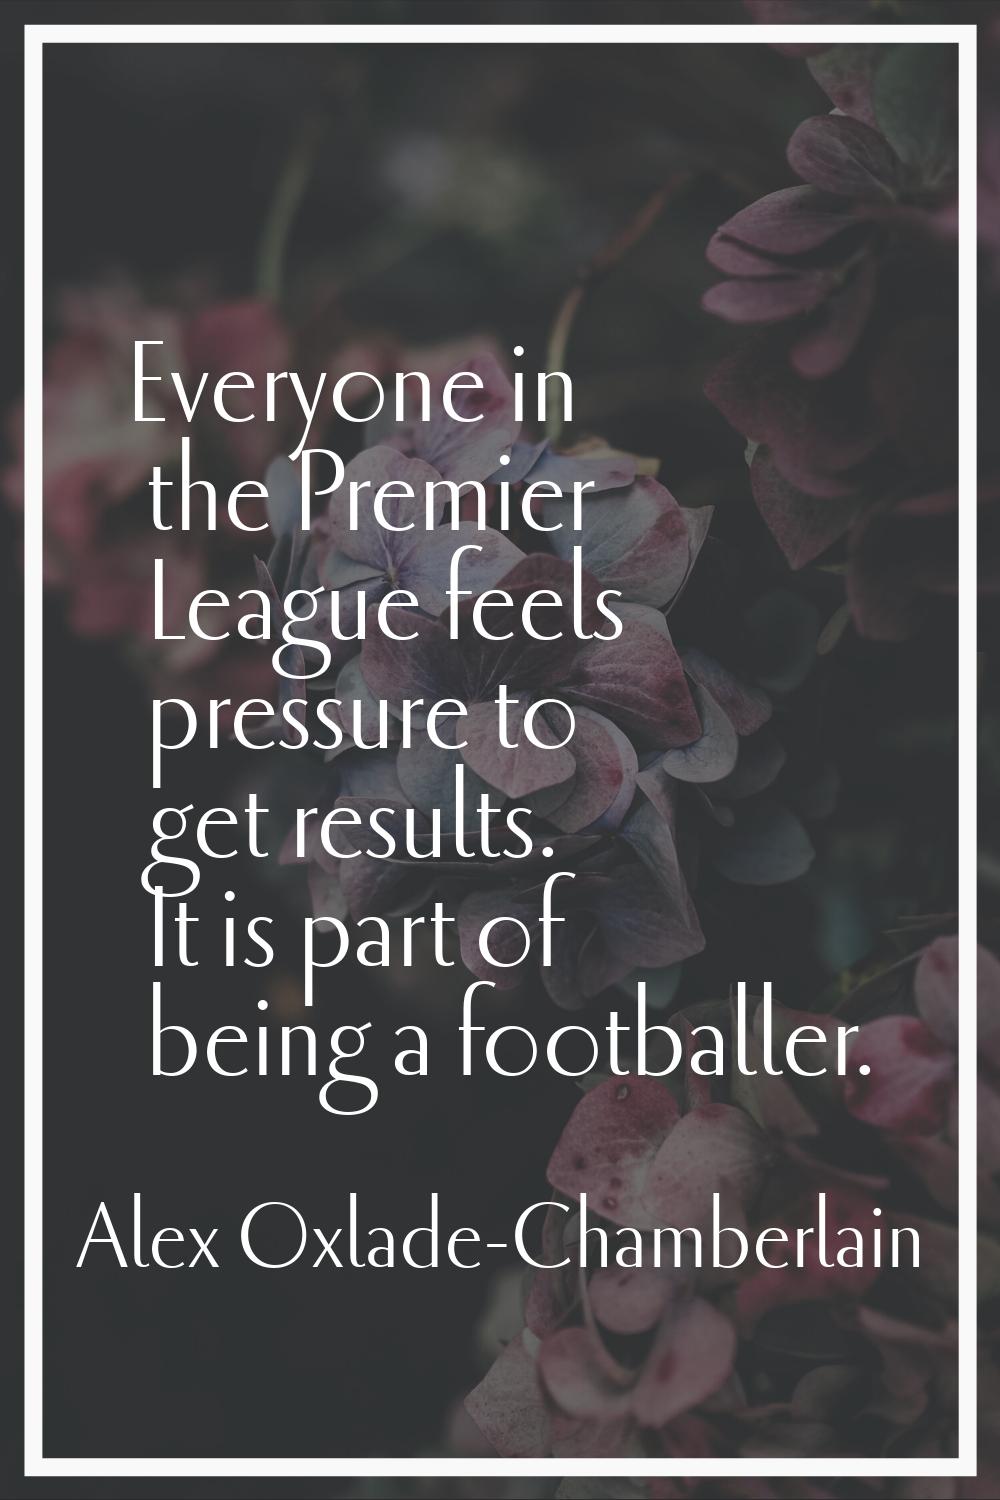 Everyone in the Premier League feels pressure to get results. It is part of being a footballer.